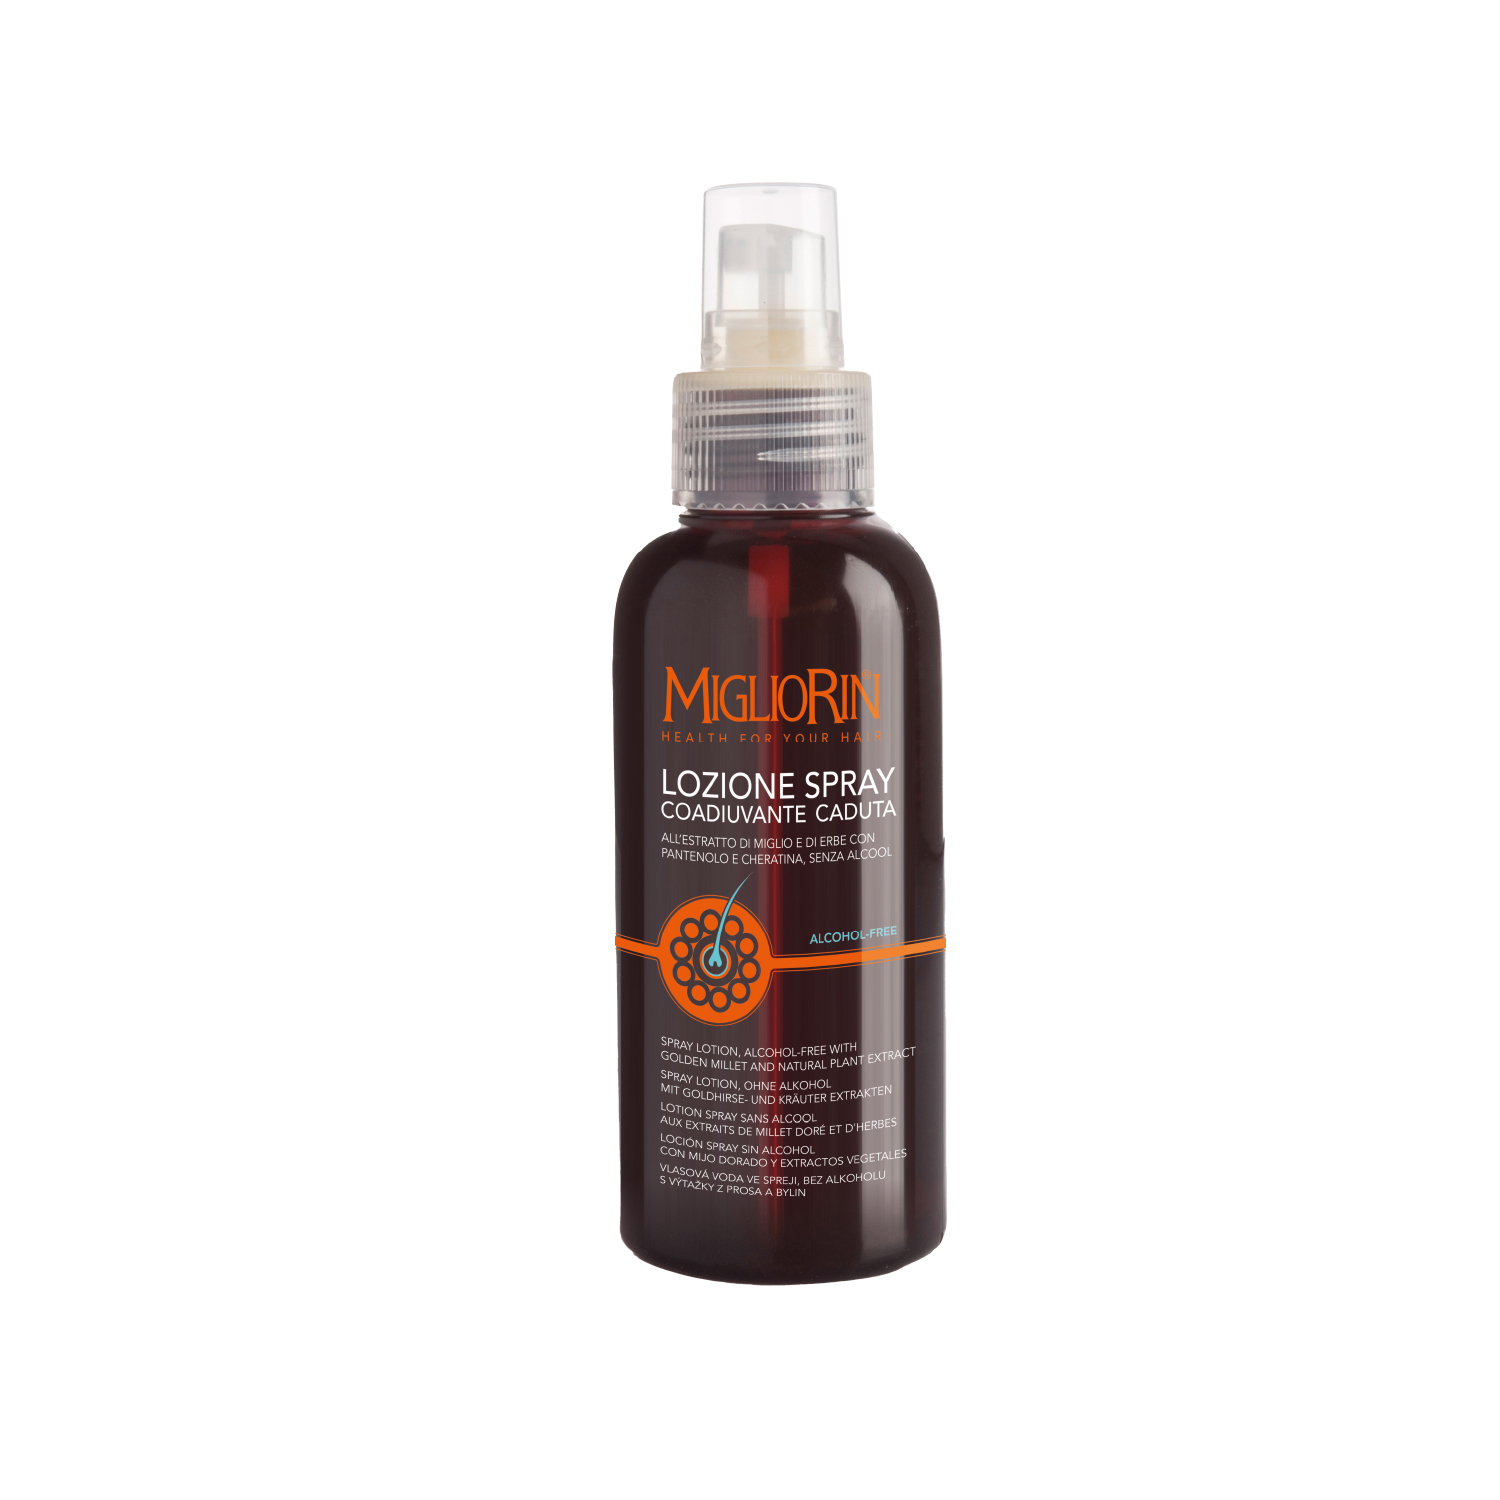 Product Image for Migliorin Hair Loss Spray Lotion Alcohol Free Af 125ml